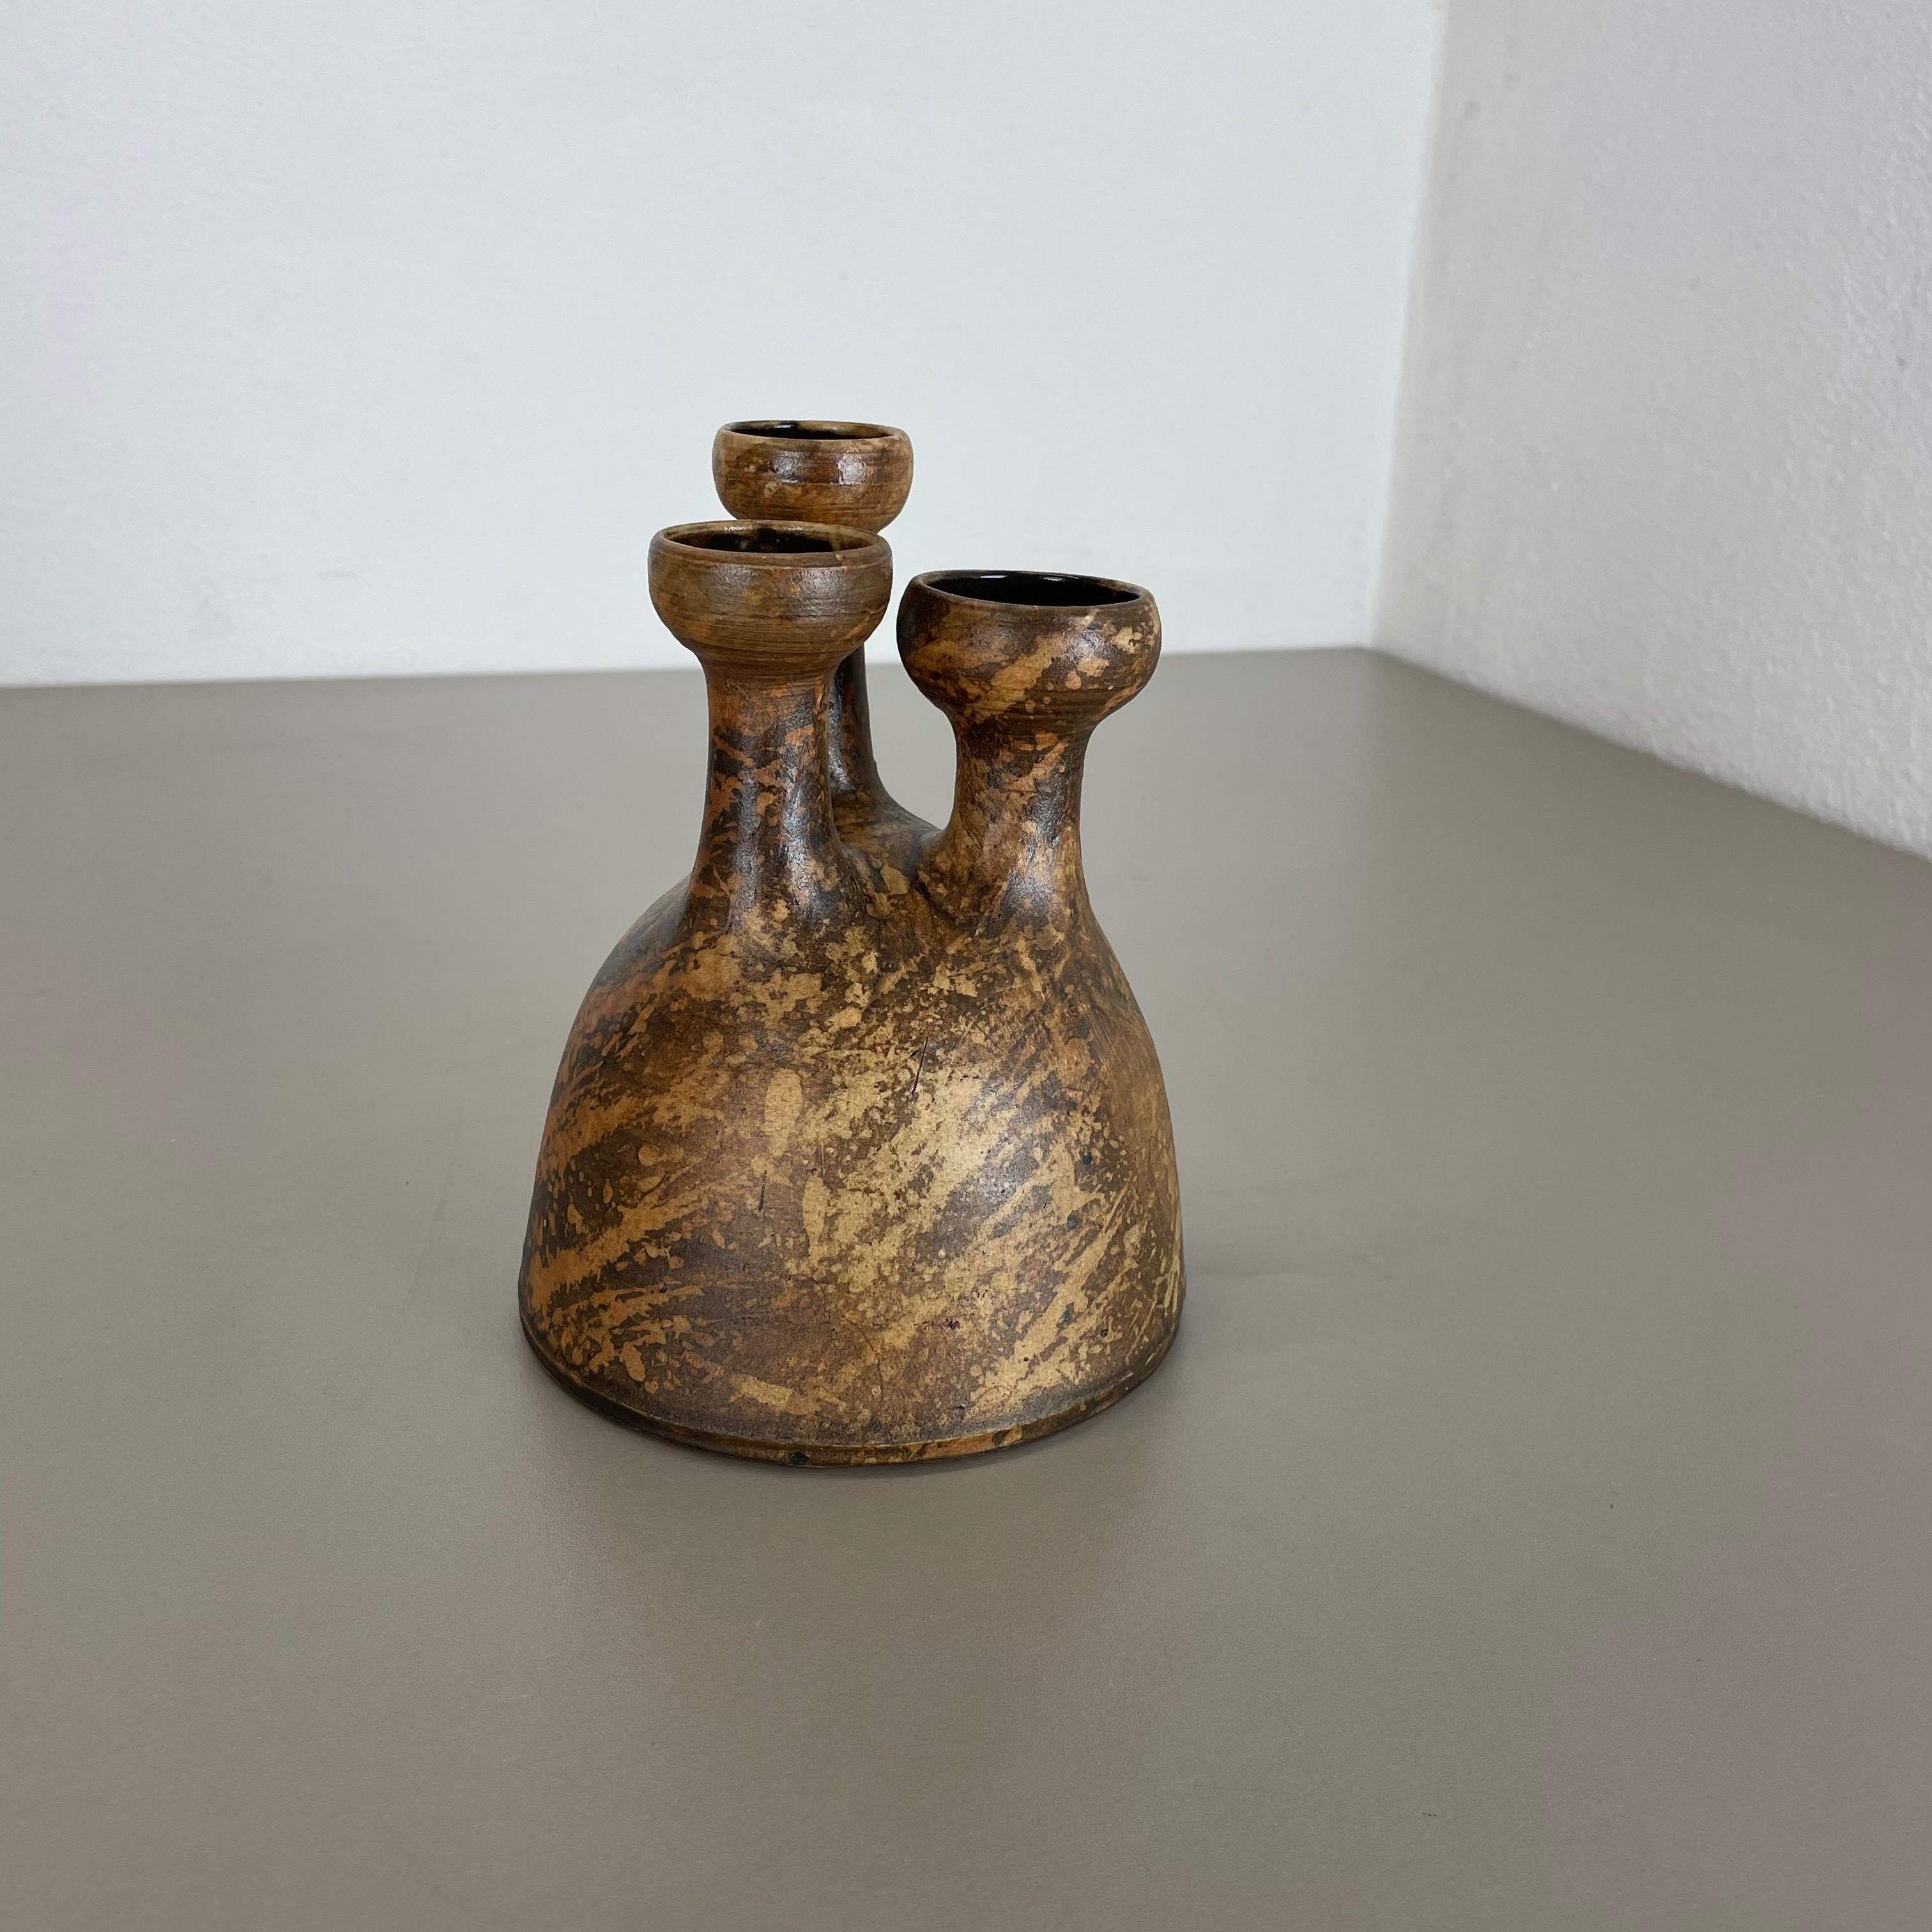 Abstract Ceramic Studio Pottery Vase by Gerhard Liebenthron, Germany, 1970s For Sale 1